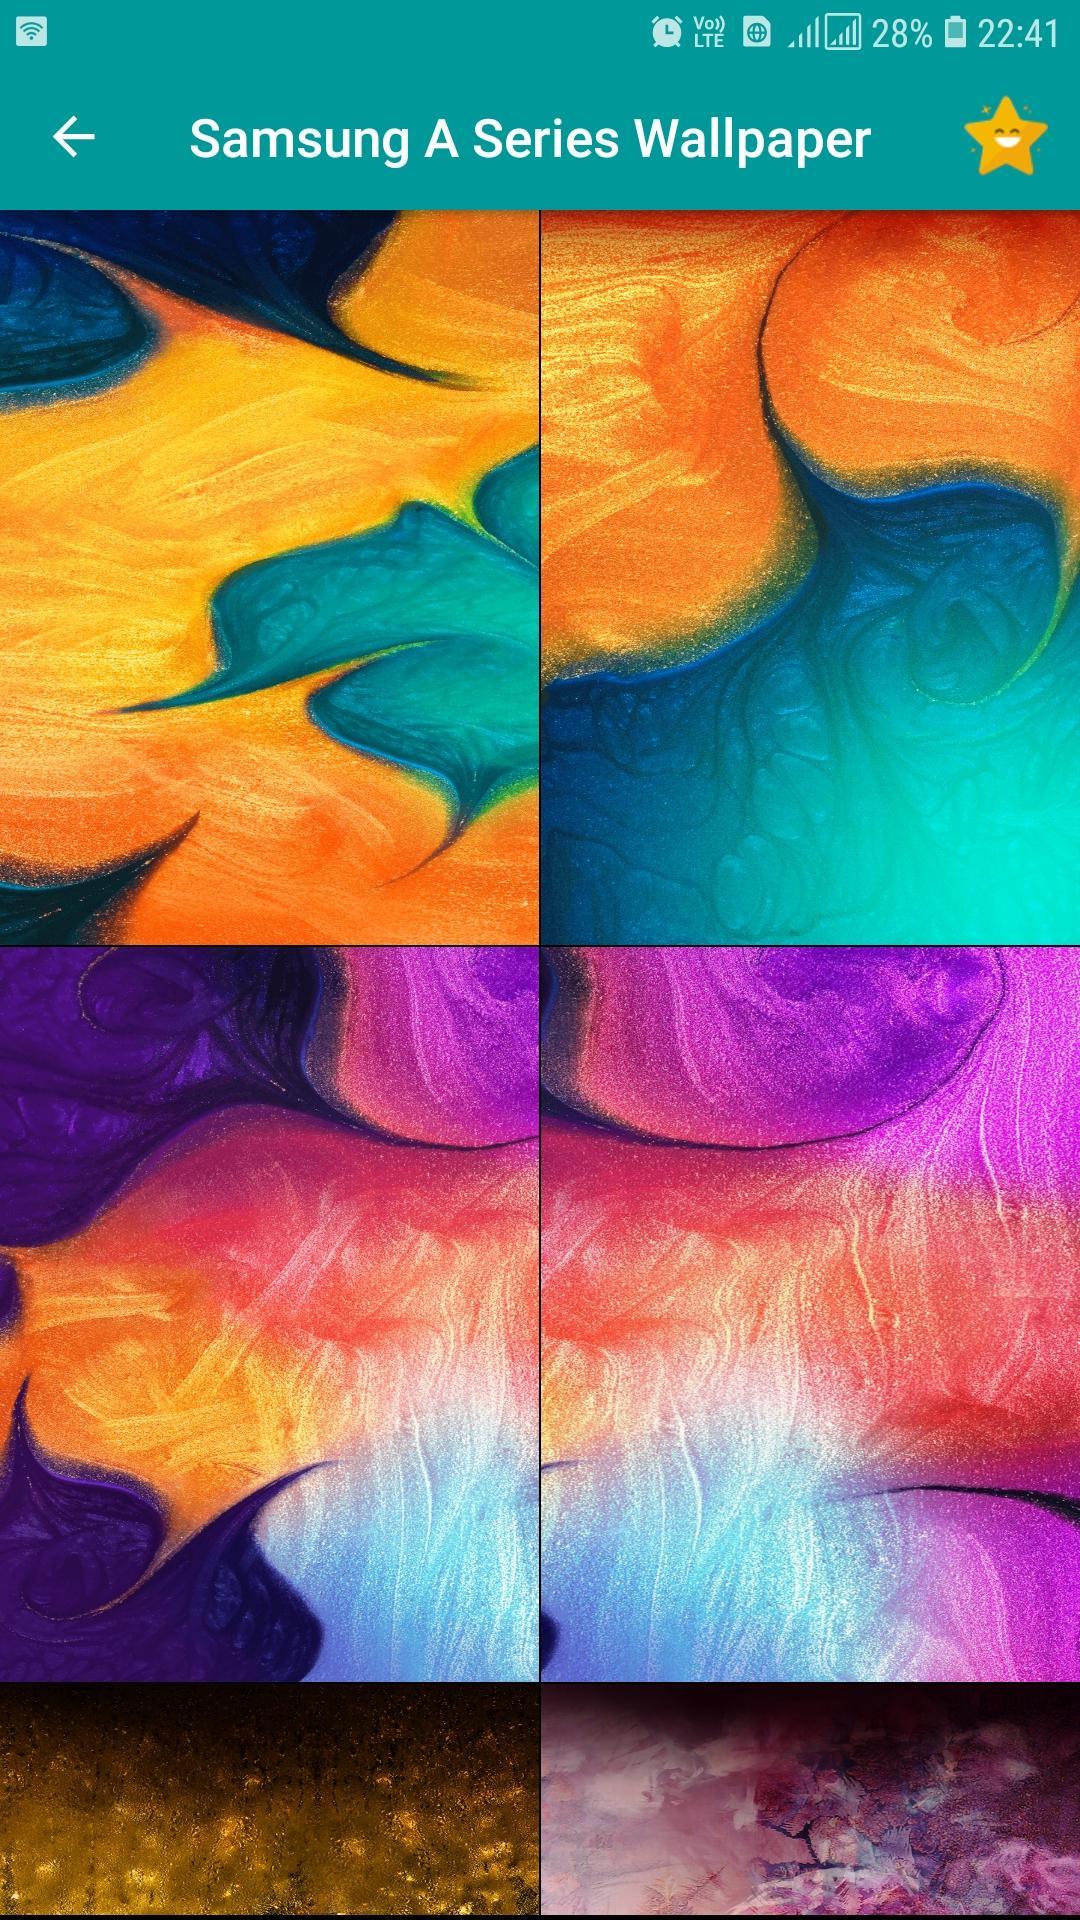 Android 用の Wallpaper For Samsung 0 0 A60 A80 Wallpapers Apk をダウンロード